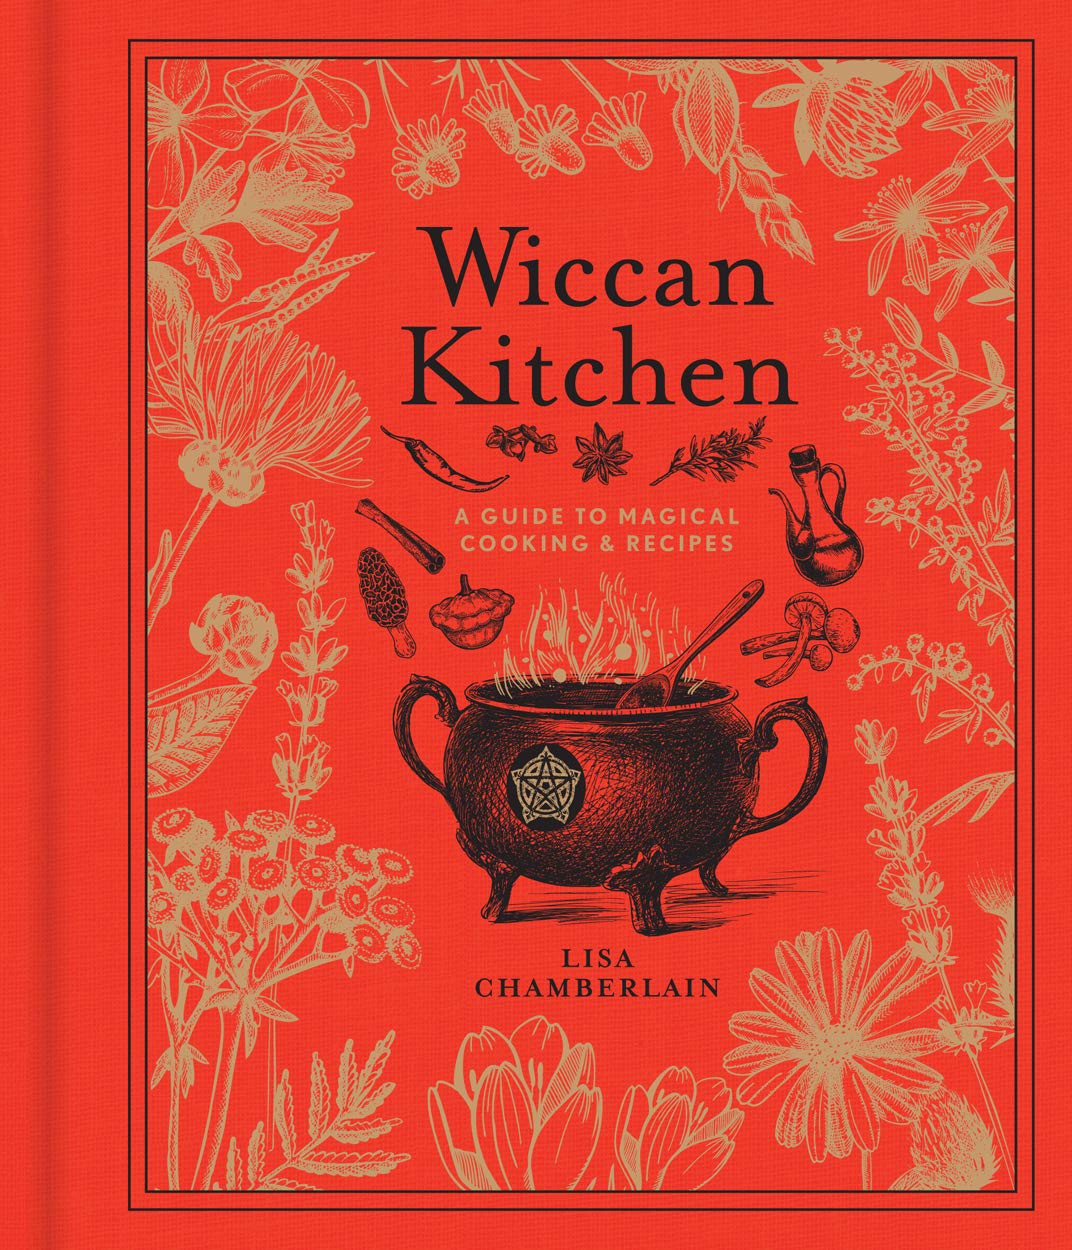 Wiccan Kitchen: A Guide to Magical Cooking & Recipes - A Cookbook